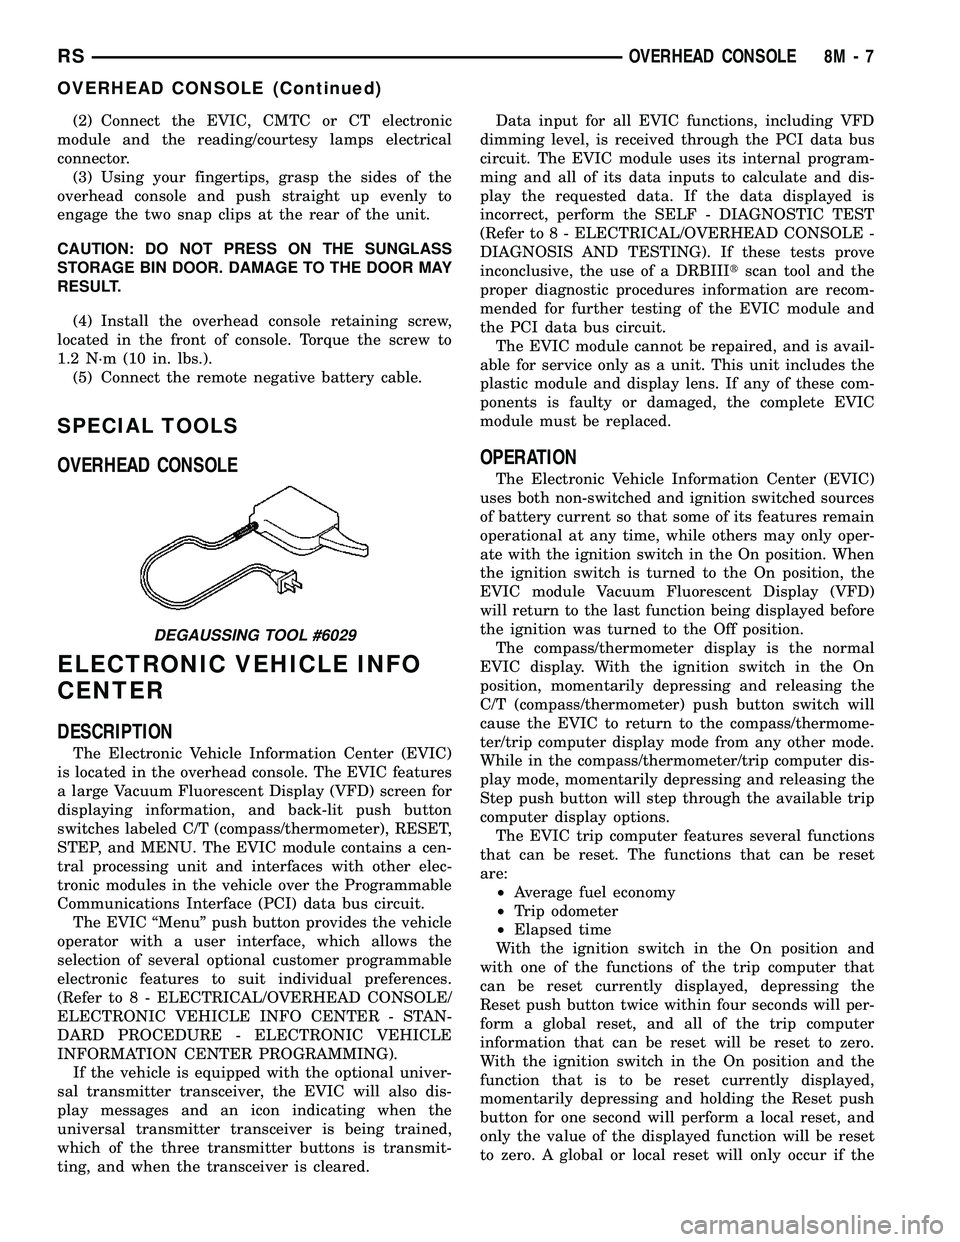 CHRYSLER VOYAGER 2005  Service Manual (2) Connect the EVIC, CMTC or CT electronic
module and the reading/courtesy lamps electrical
connector.
(3) Using your fingertips, grasp the sides of the
overhead console and push straight up evenly t